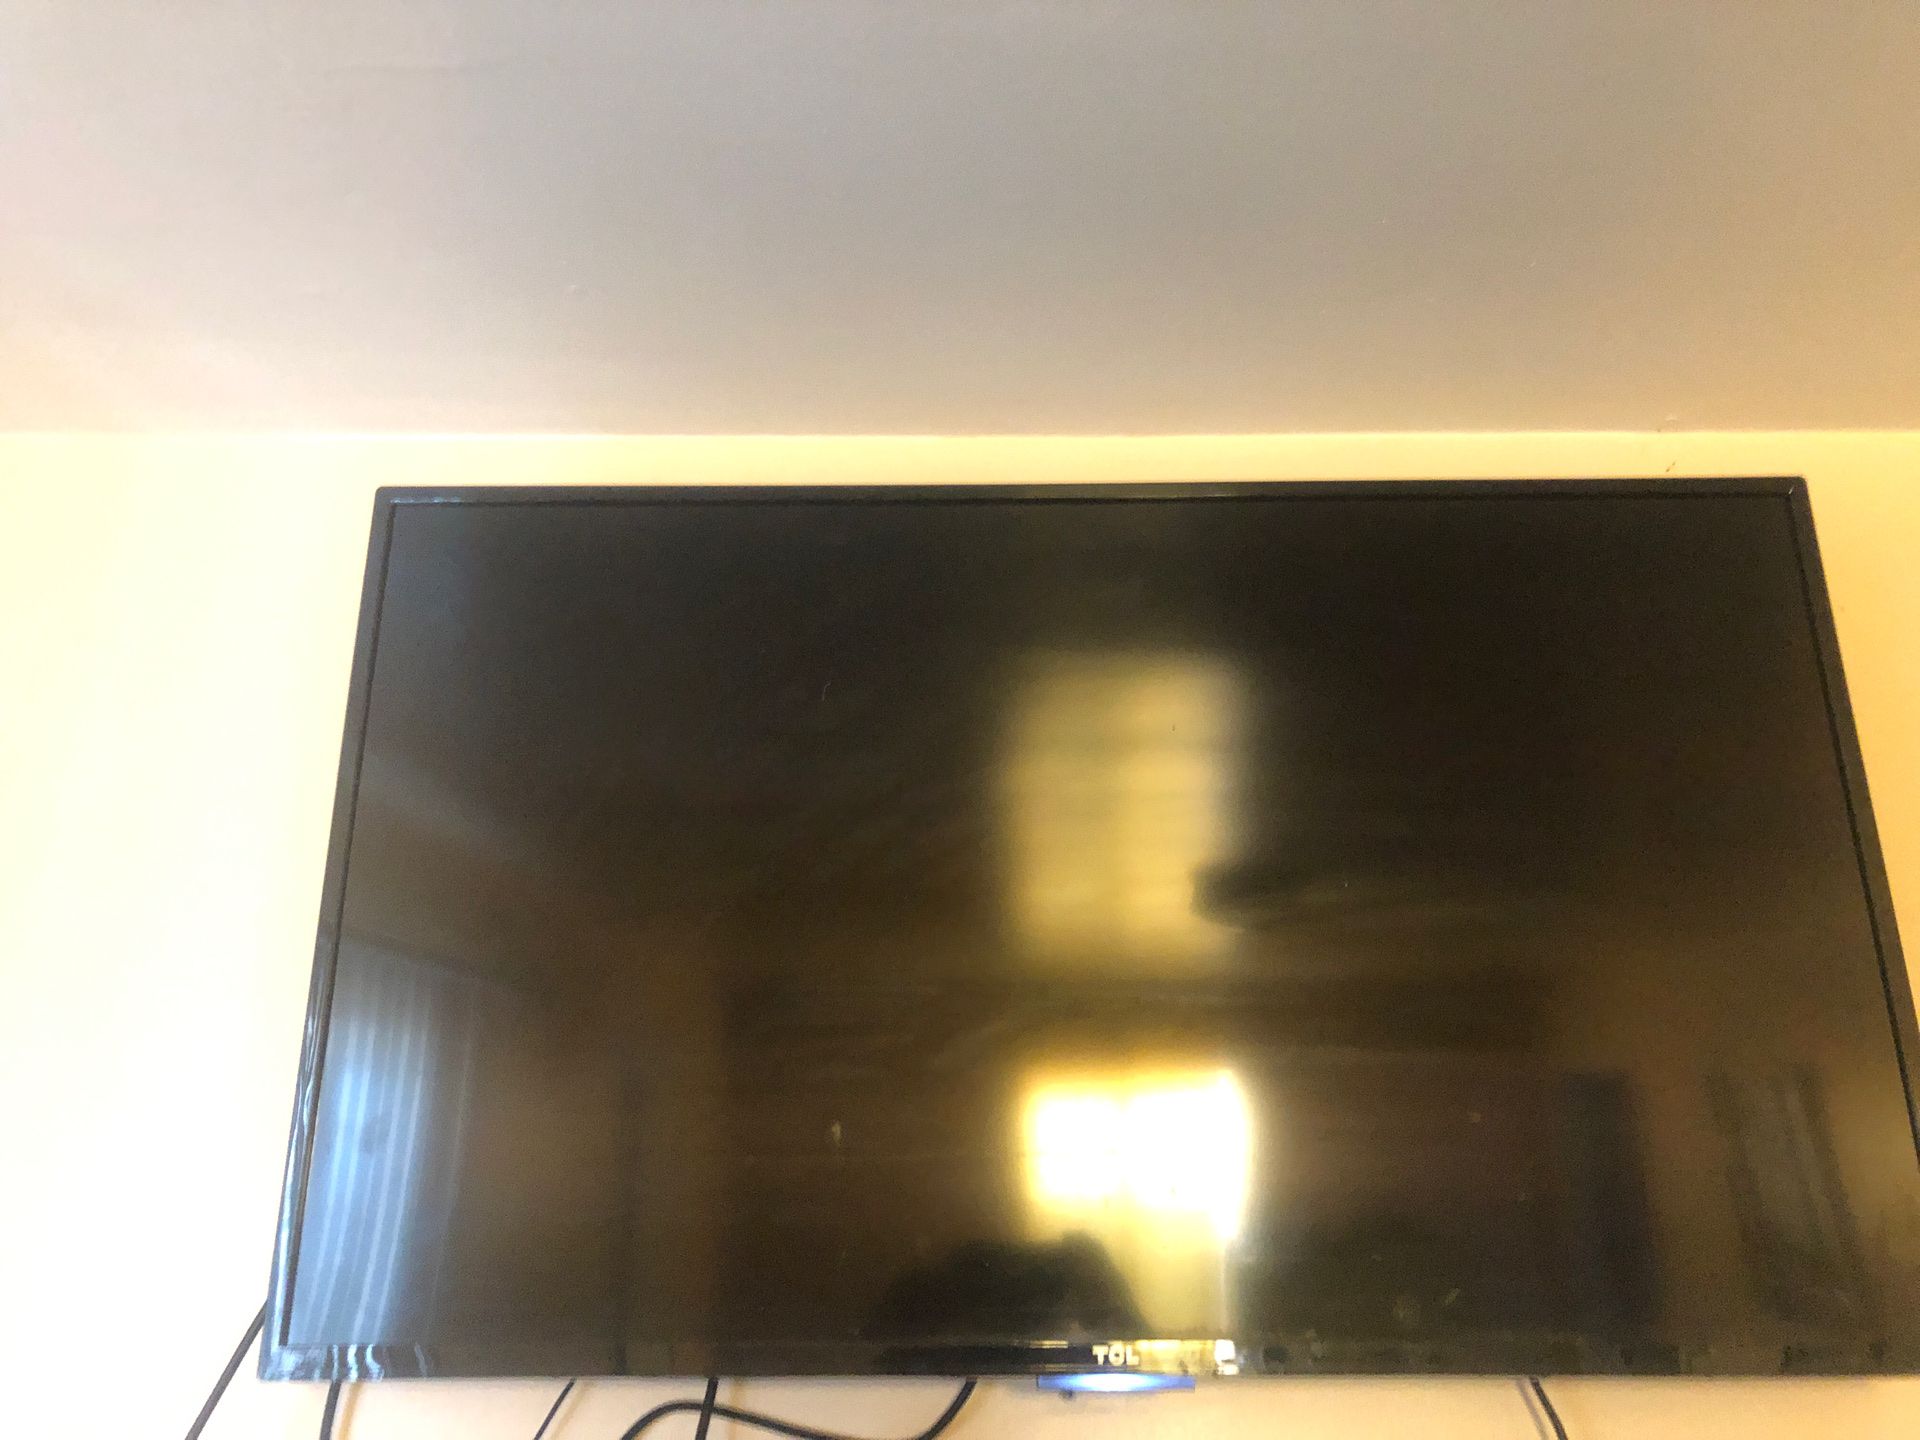 Tv tCl 32 inch not smart tv in good condition 150 $